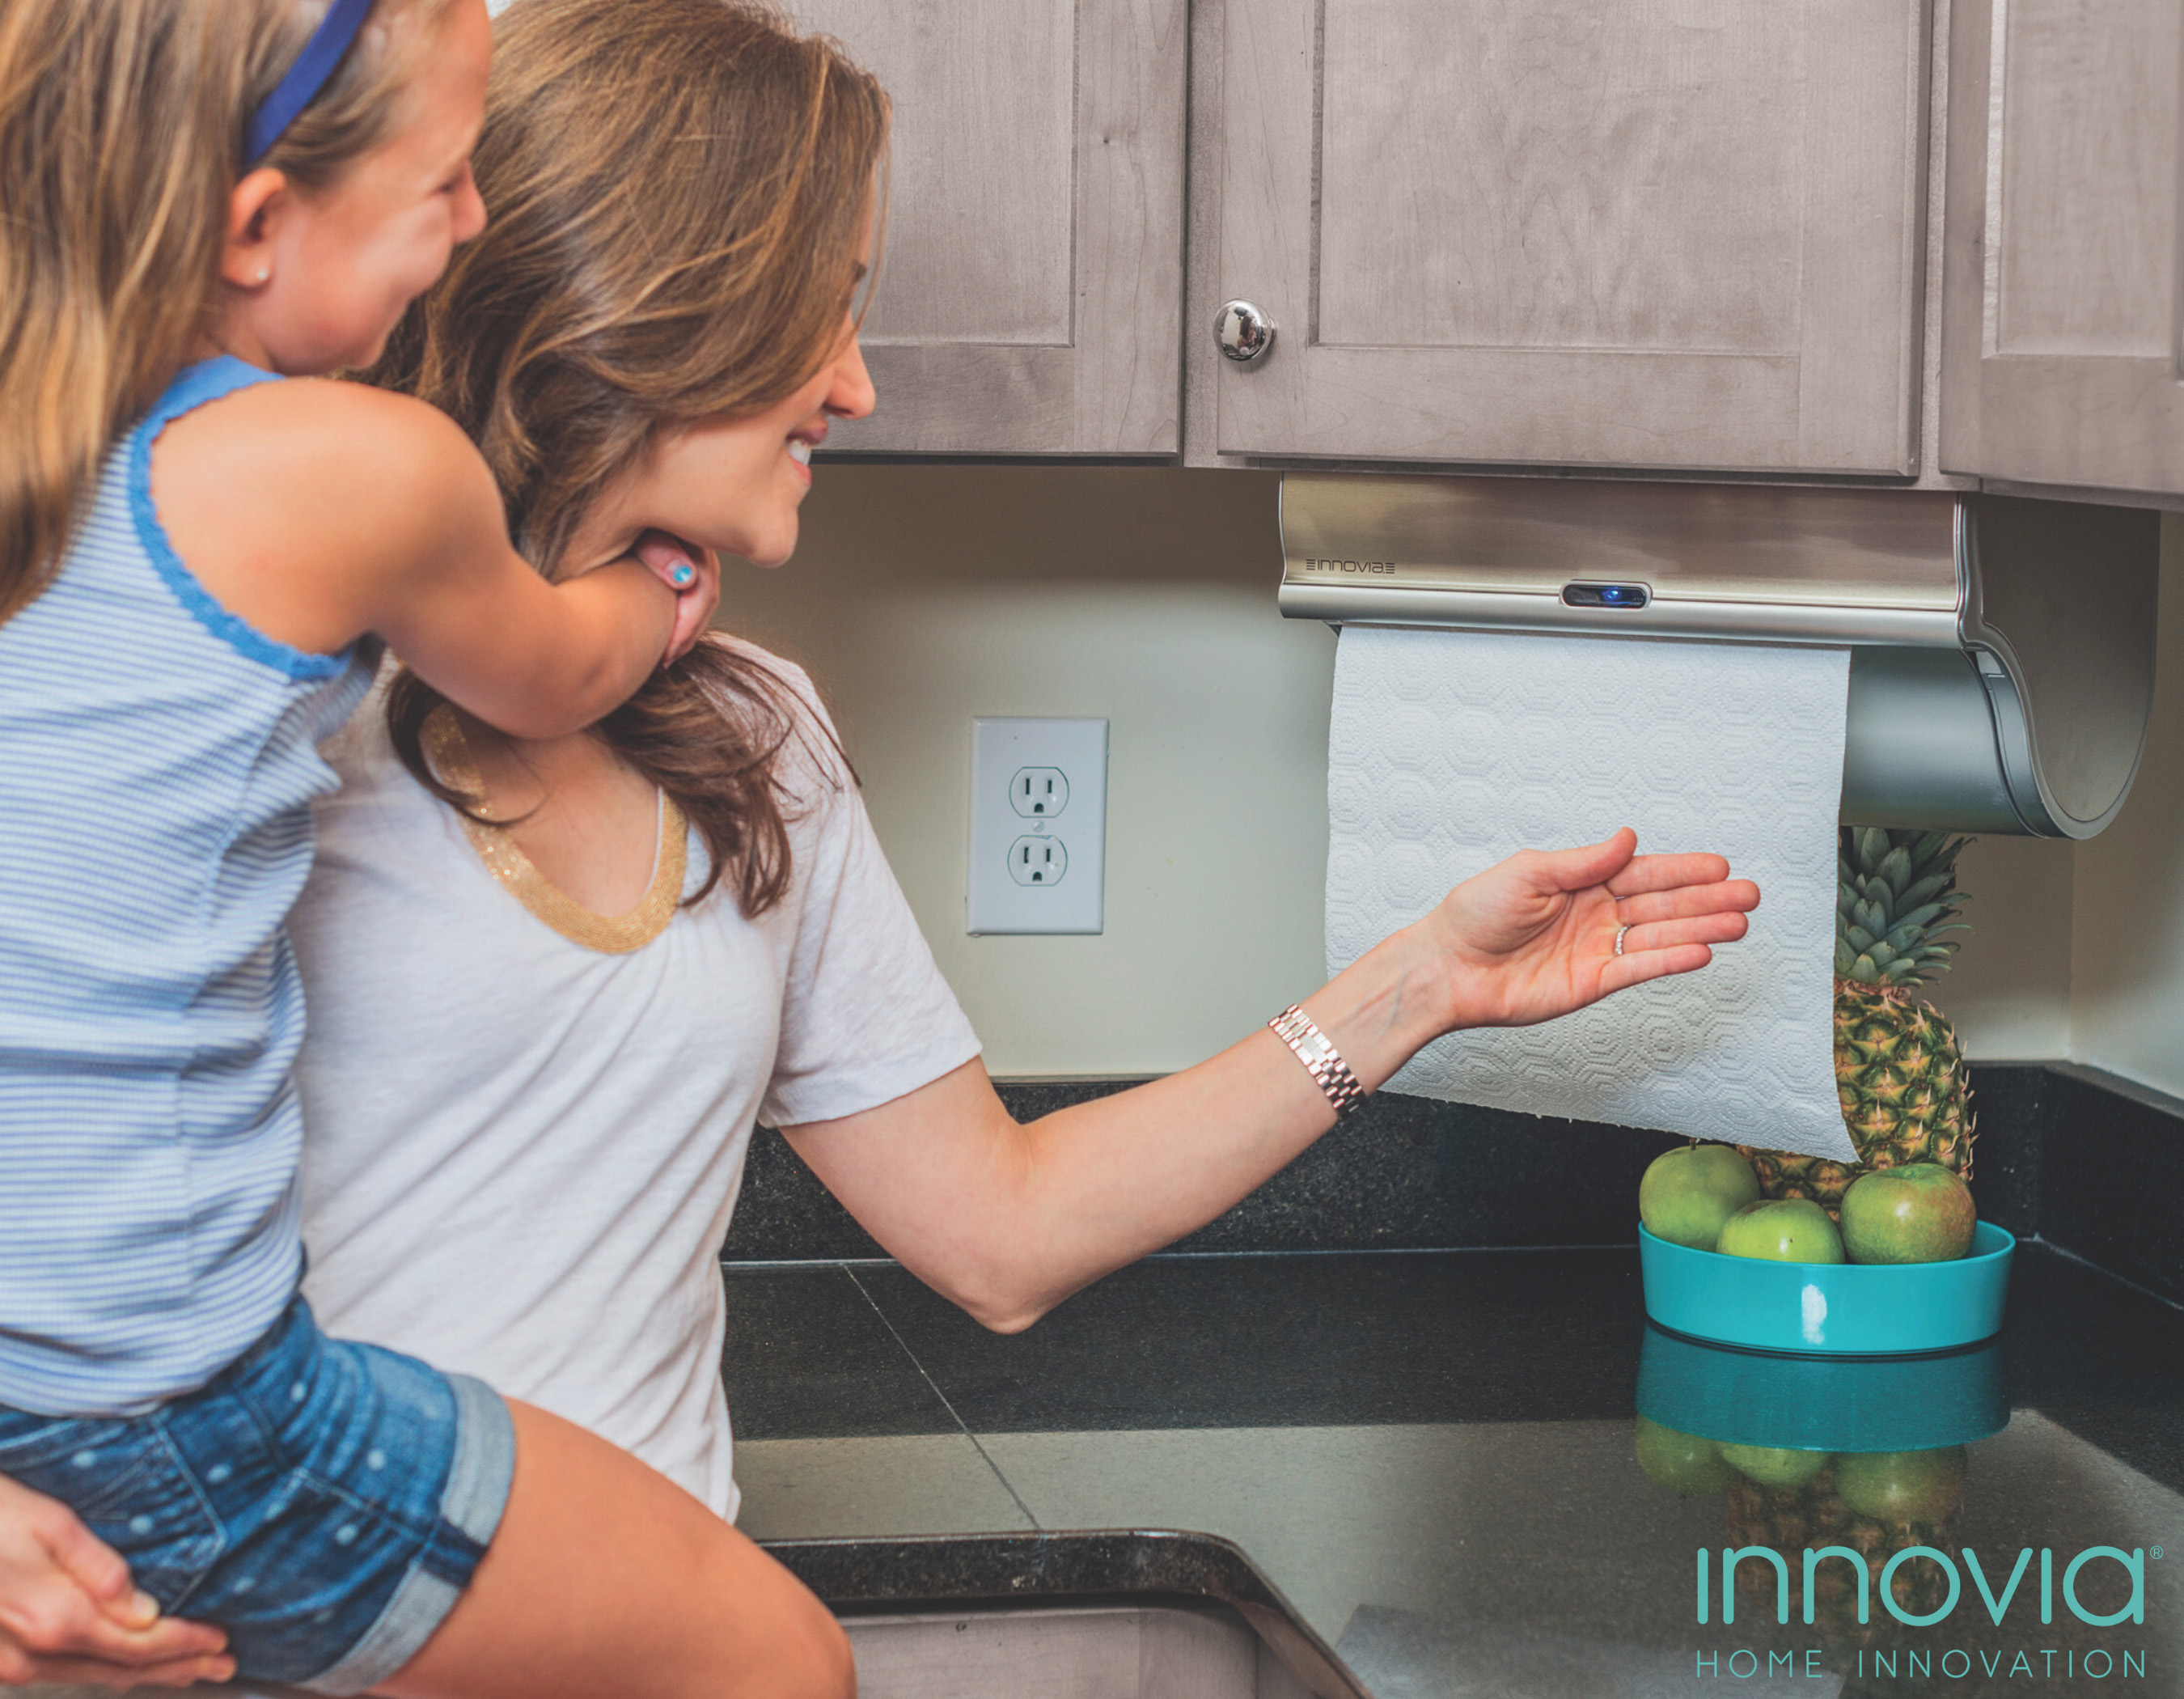 The Innovia® Paper Towel Dispenser helps reduces the risk of cross contamination. Just wave your hand, and it dispenses the number of sheets you need, keeping the rest of the roll contained inside.